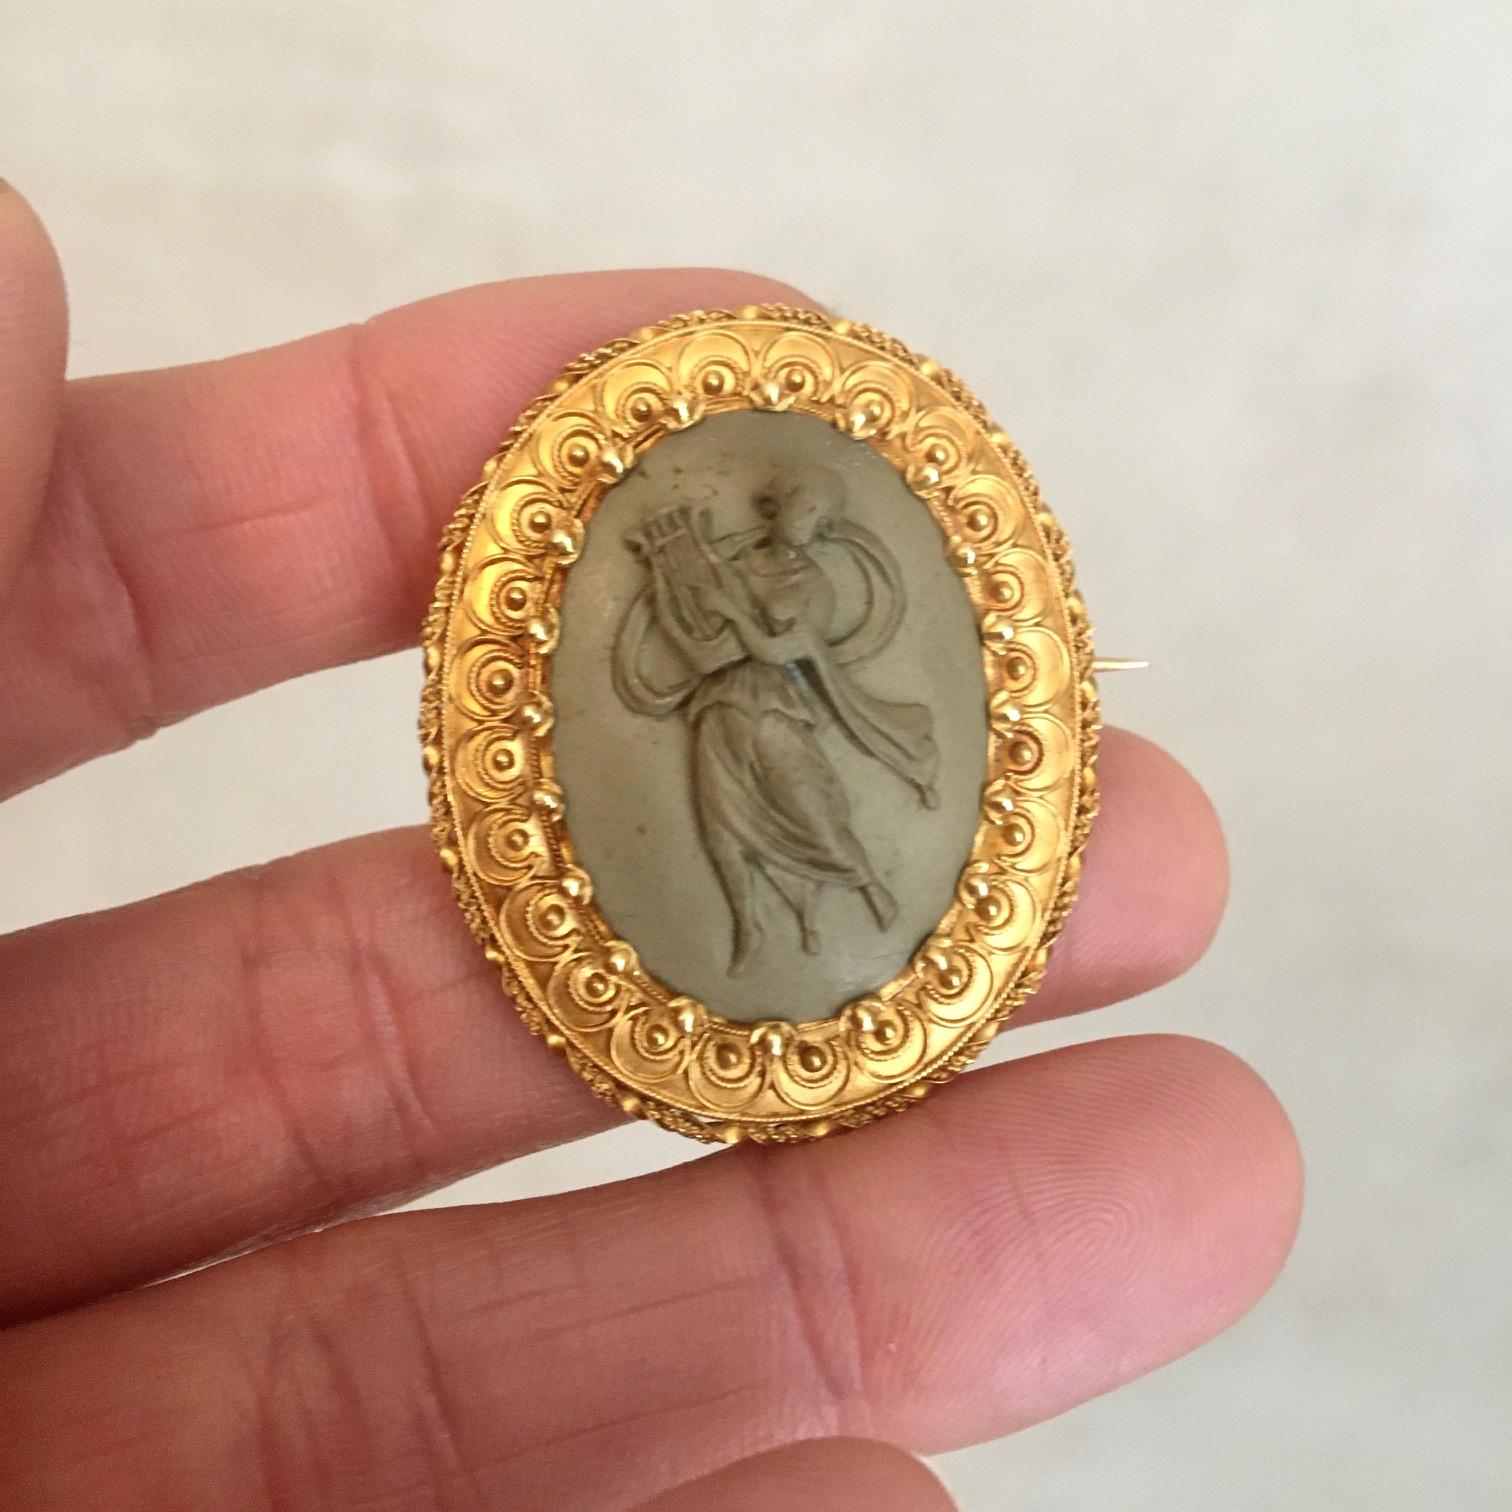 An antique 19th century high relief lava cameo brooch created with a 14 karat yellow gold frame. This gorgeous carved high relief depicts a graceful muse playing her lyre. The gold border is finely detailed with twisted ribbon around the edge, rope